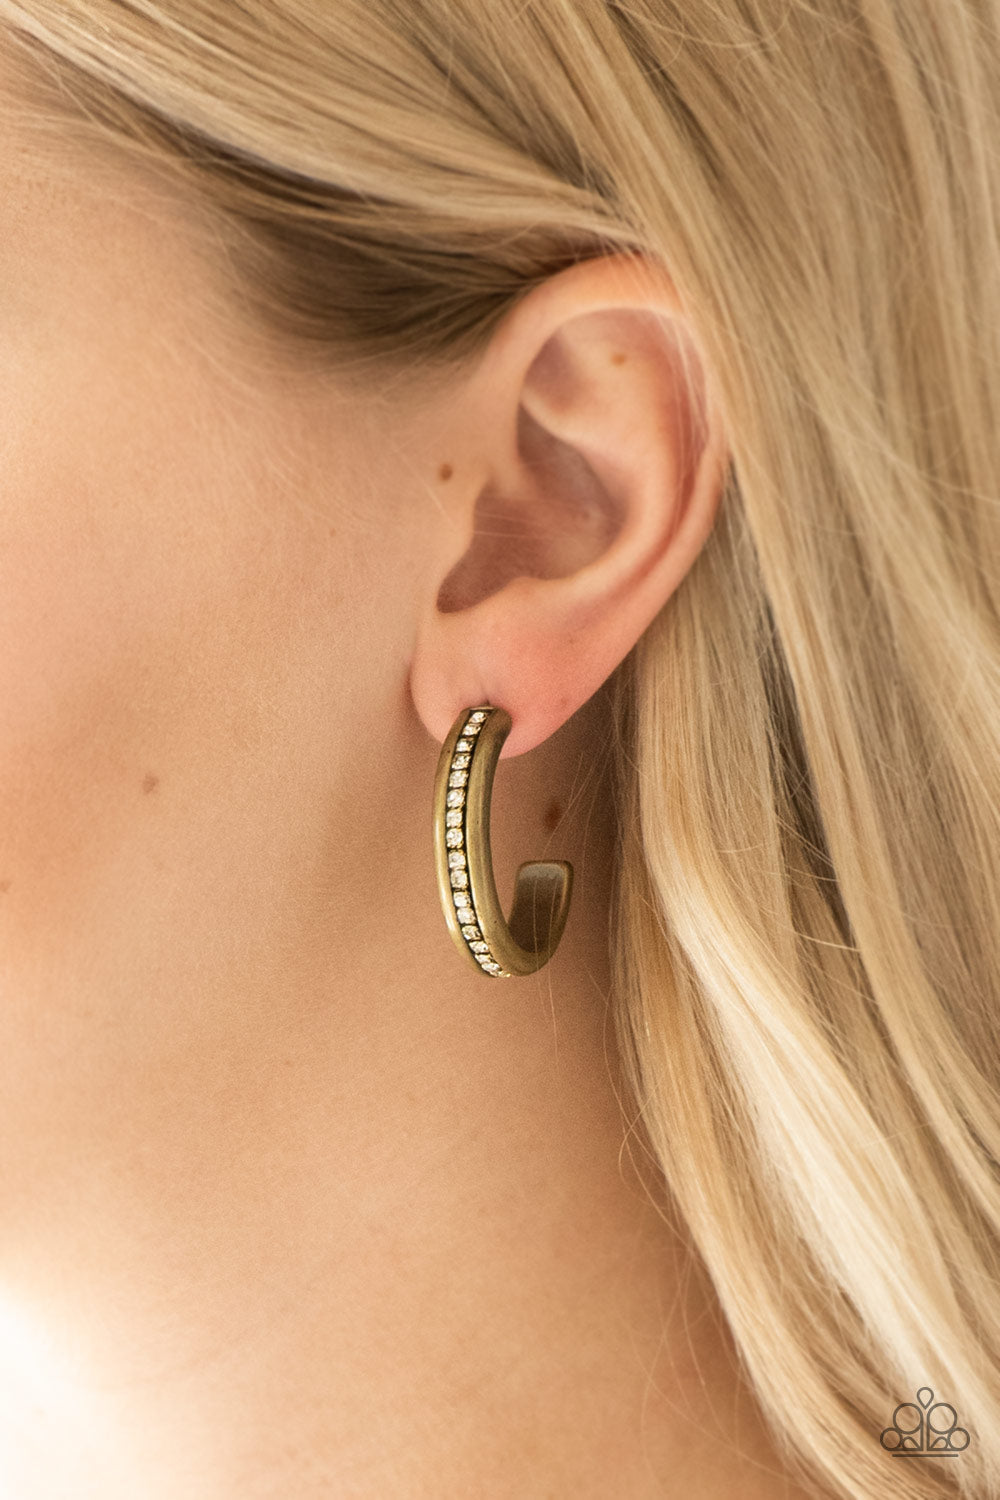 5th Avenue Fashionista - Brass Hoop Earrings - Paparazzi Accessories - A row of glassy white rhinestones is encrusted down the spine of a burnished brass hoop for a refined look. Earring attaches to a standard post fitting. Hoop measures 1 1/4" in diameter. Sold as one pair of hoop earrings.